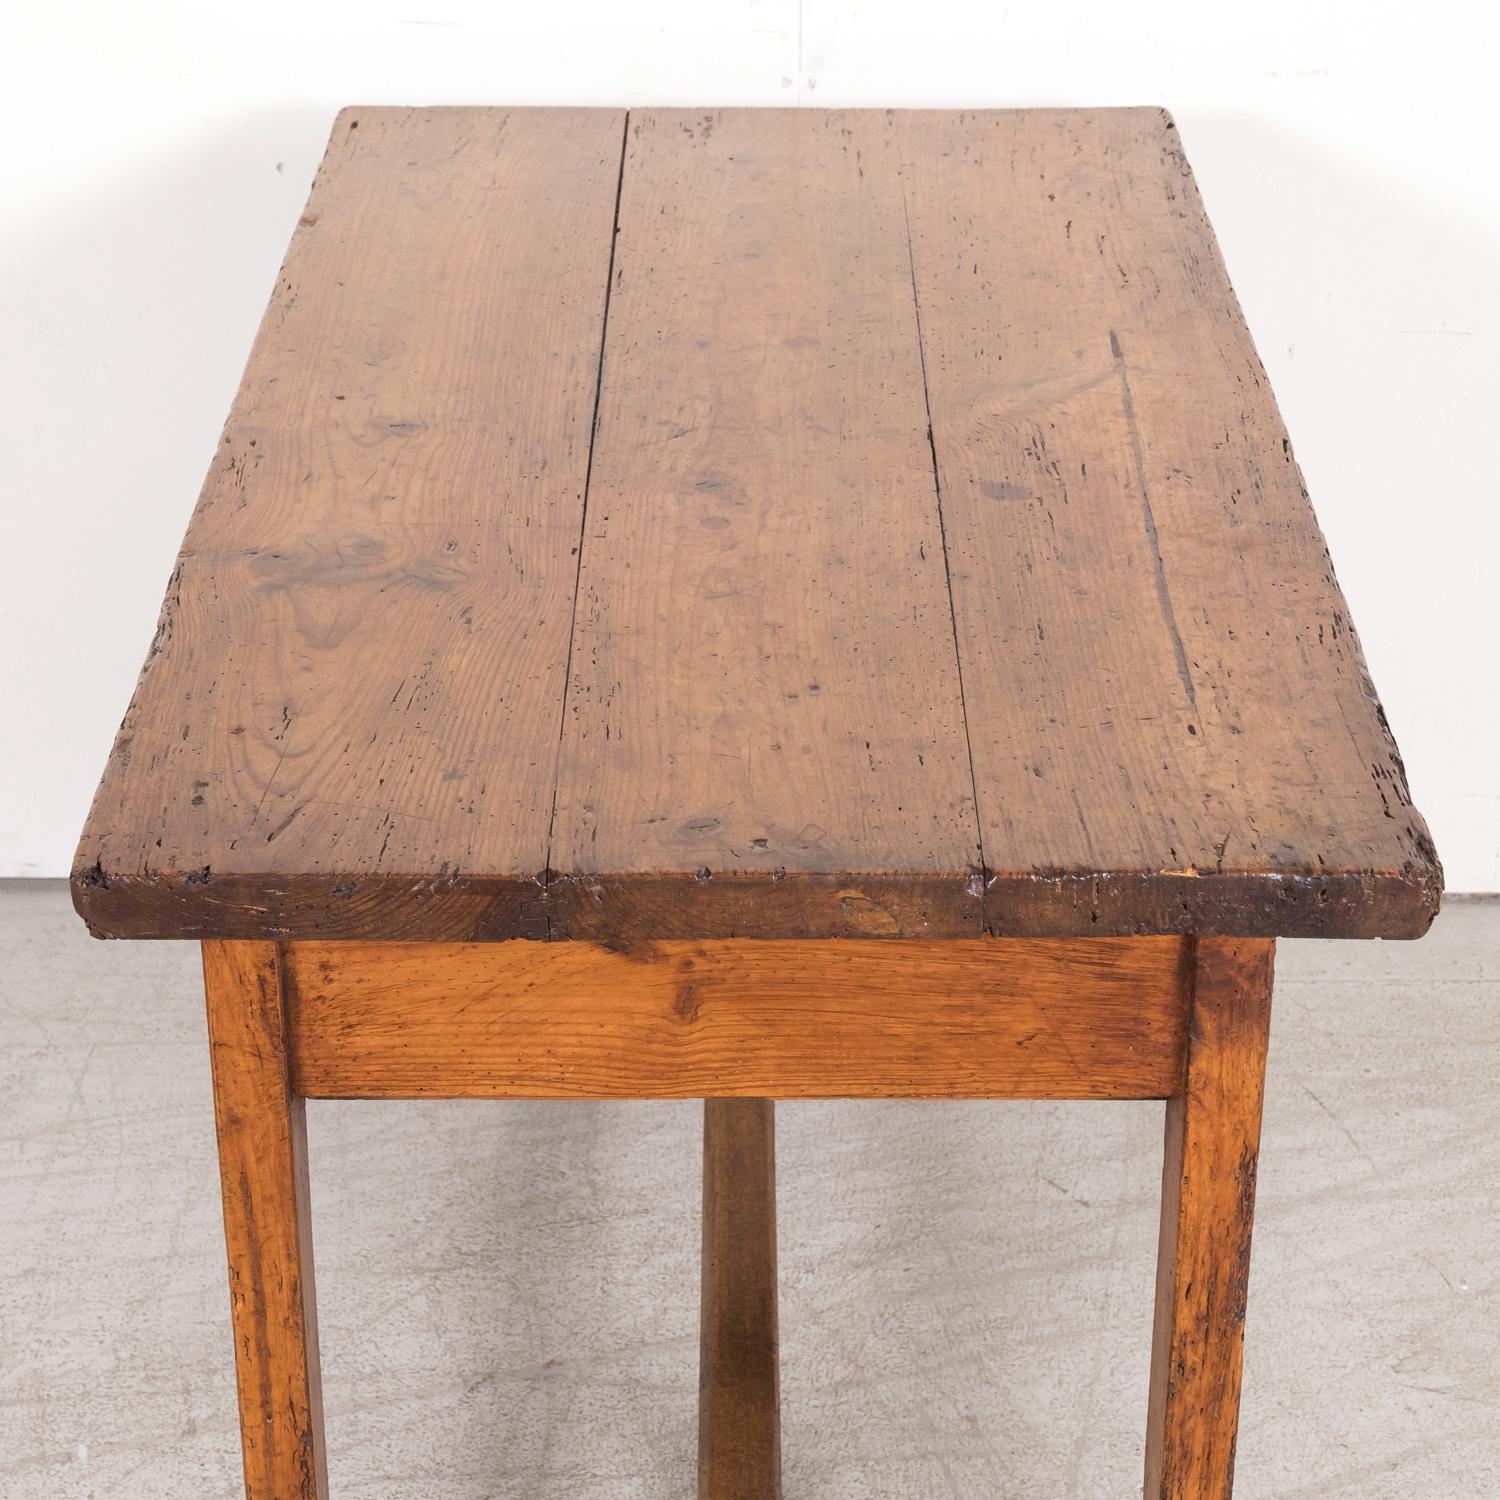 18th Century French Provincial Primitive Larch Wood Side Table or Desk with Draw For Sale 11